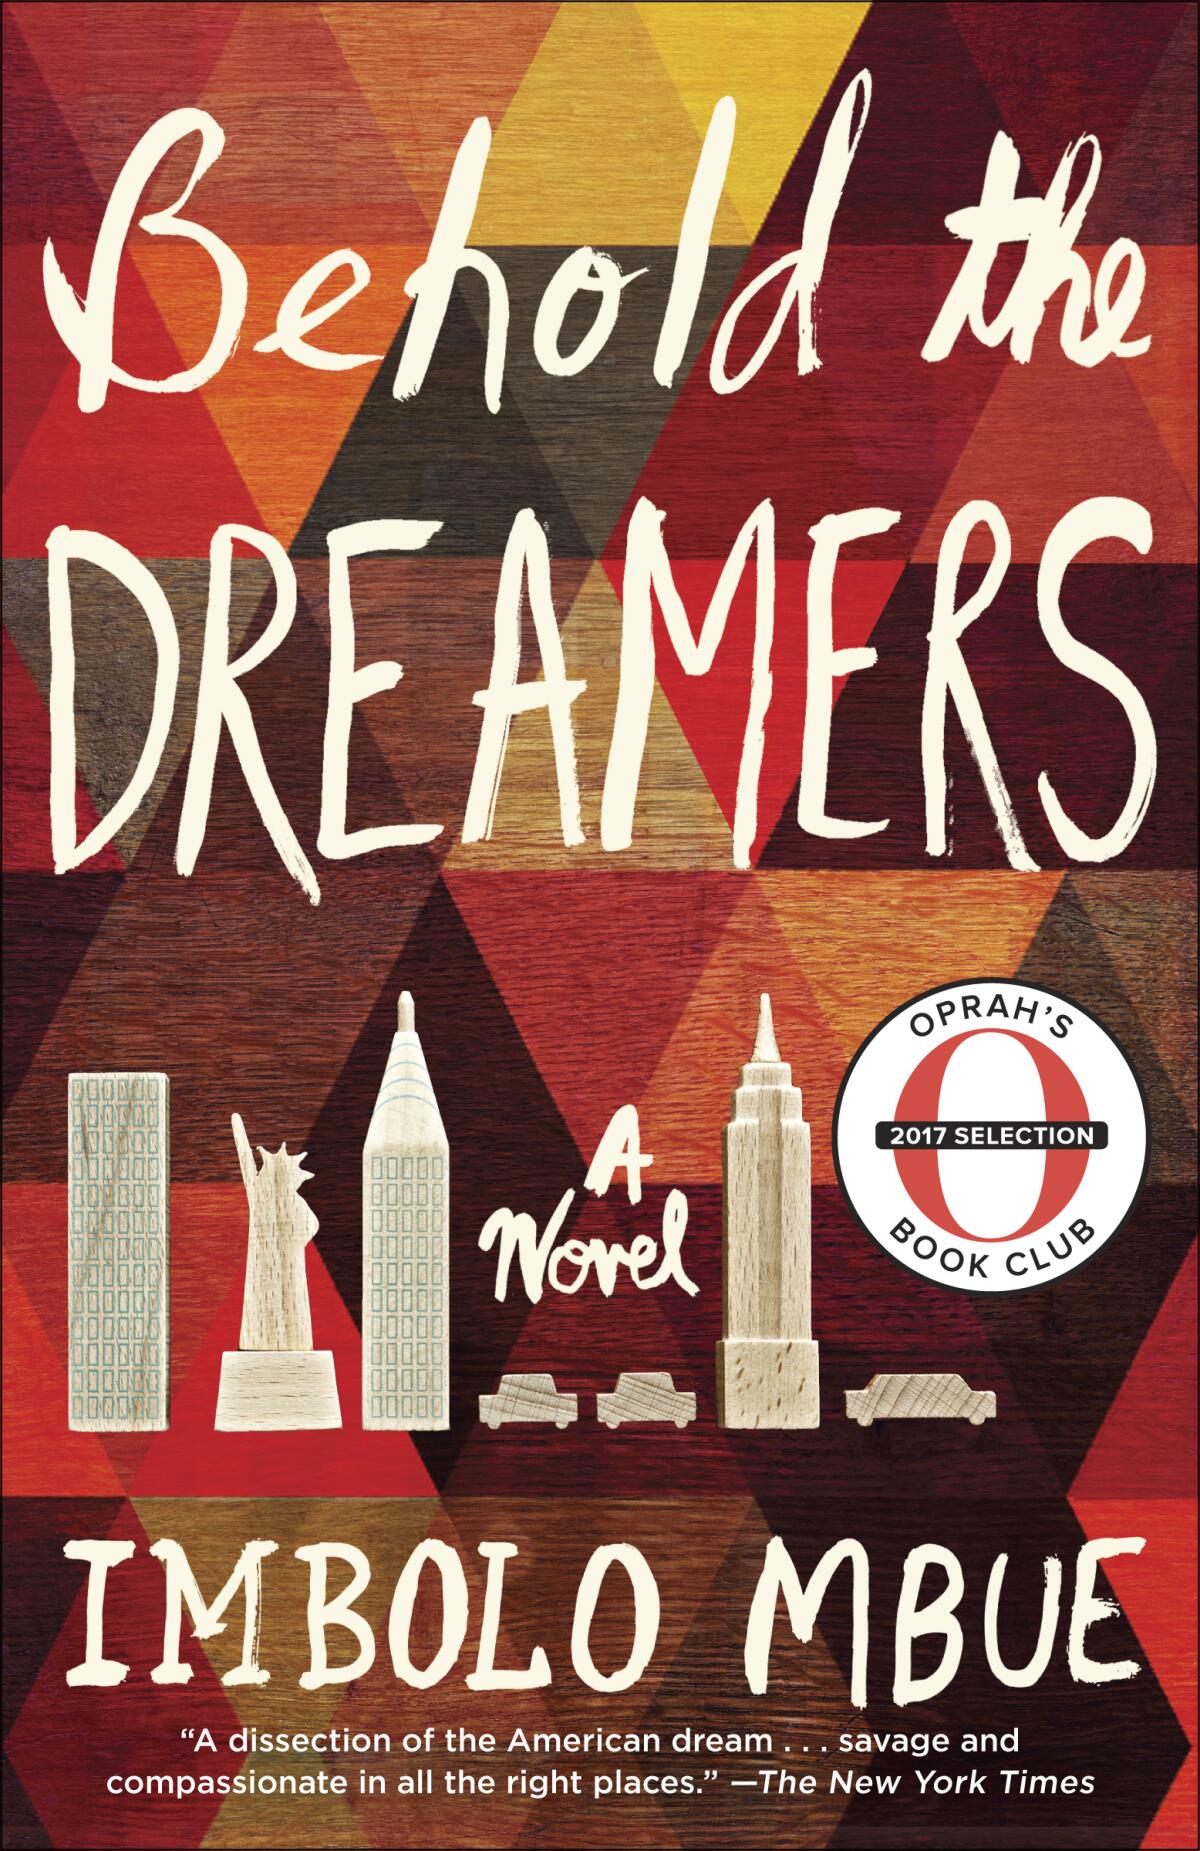 Imbolo Mbue's first novel, "Behold the Dreamers," became a bestseller in 2016.